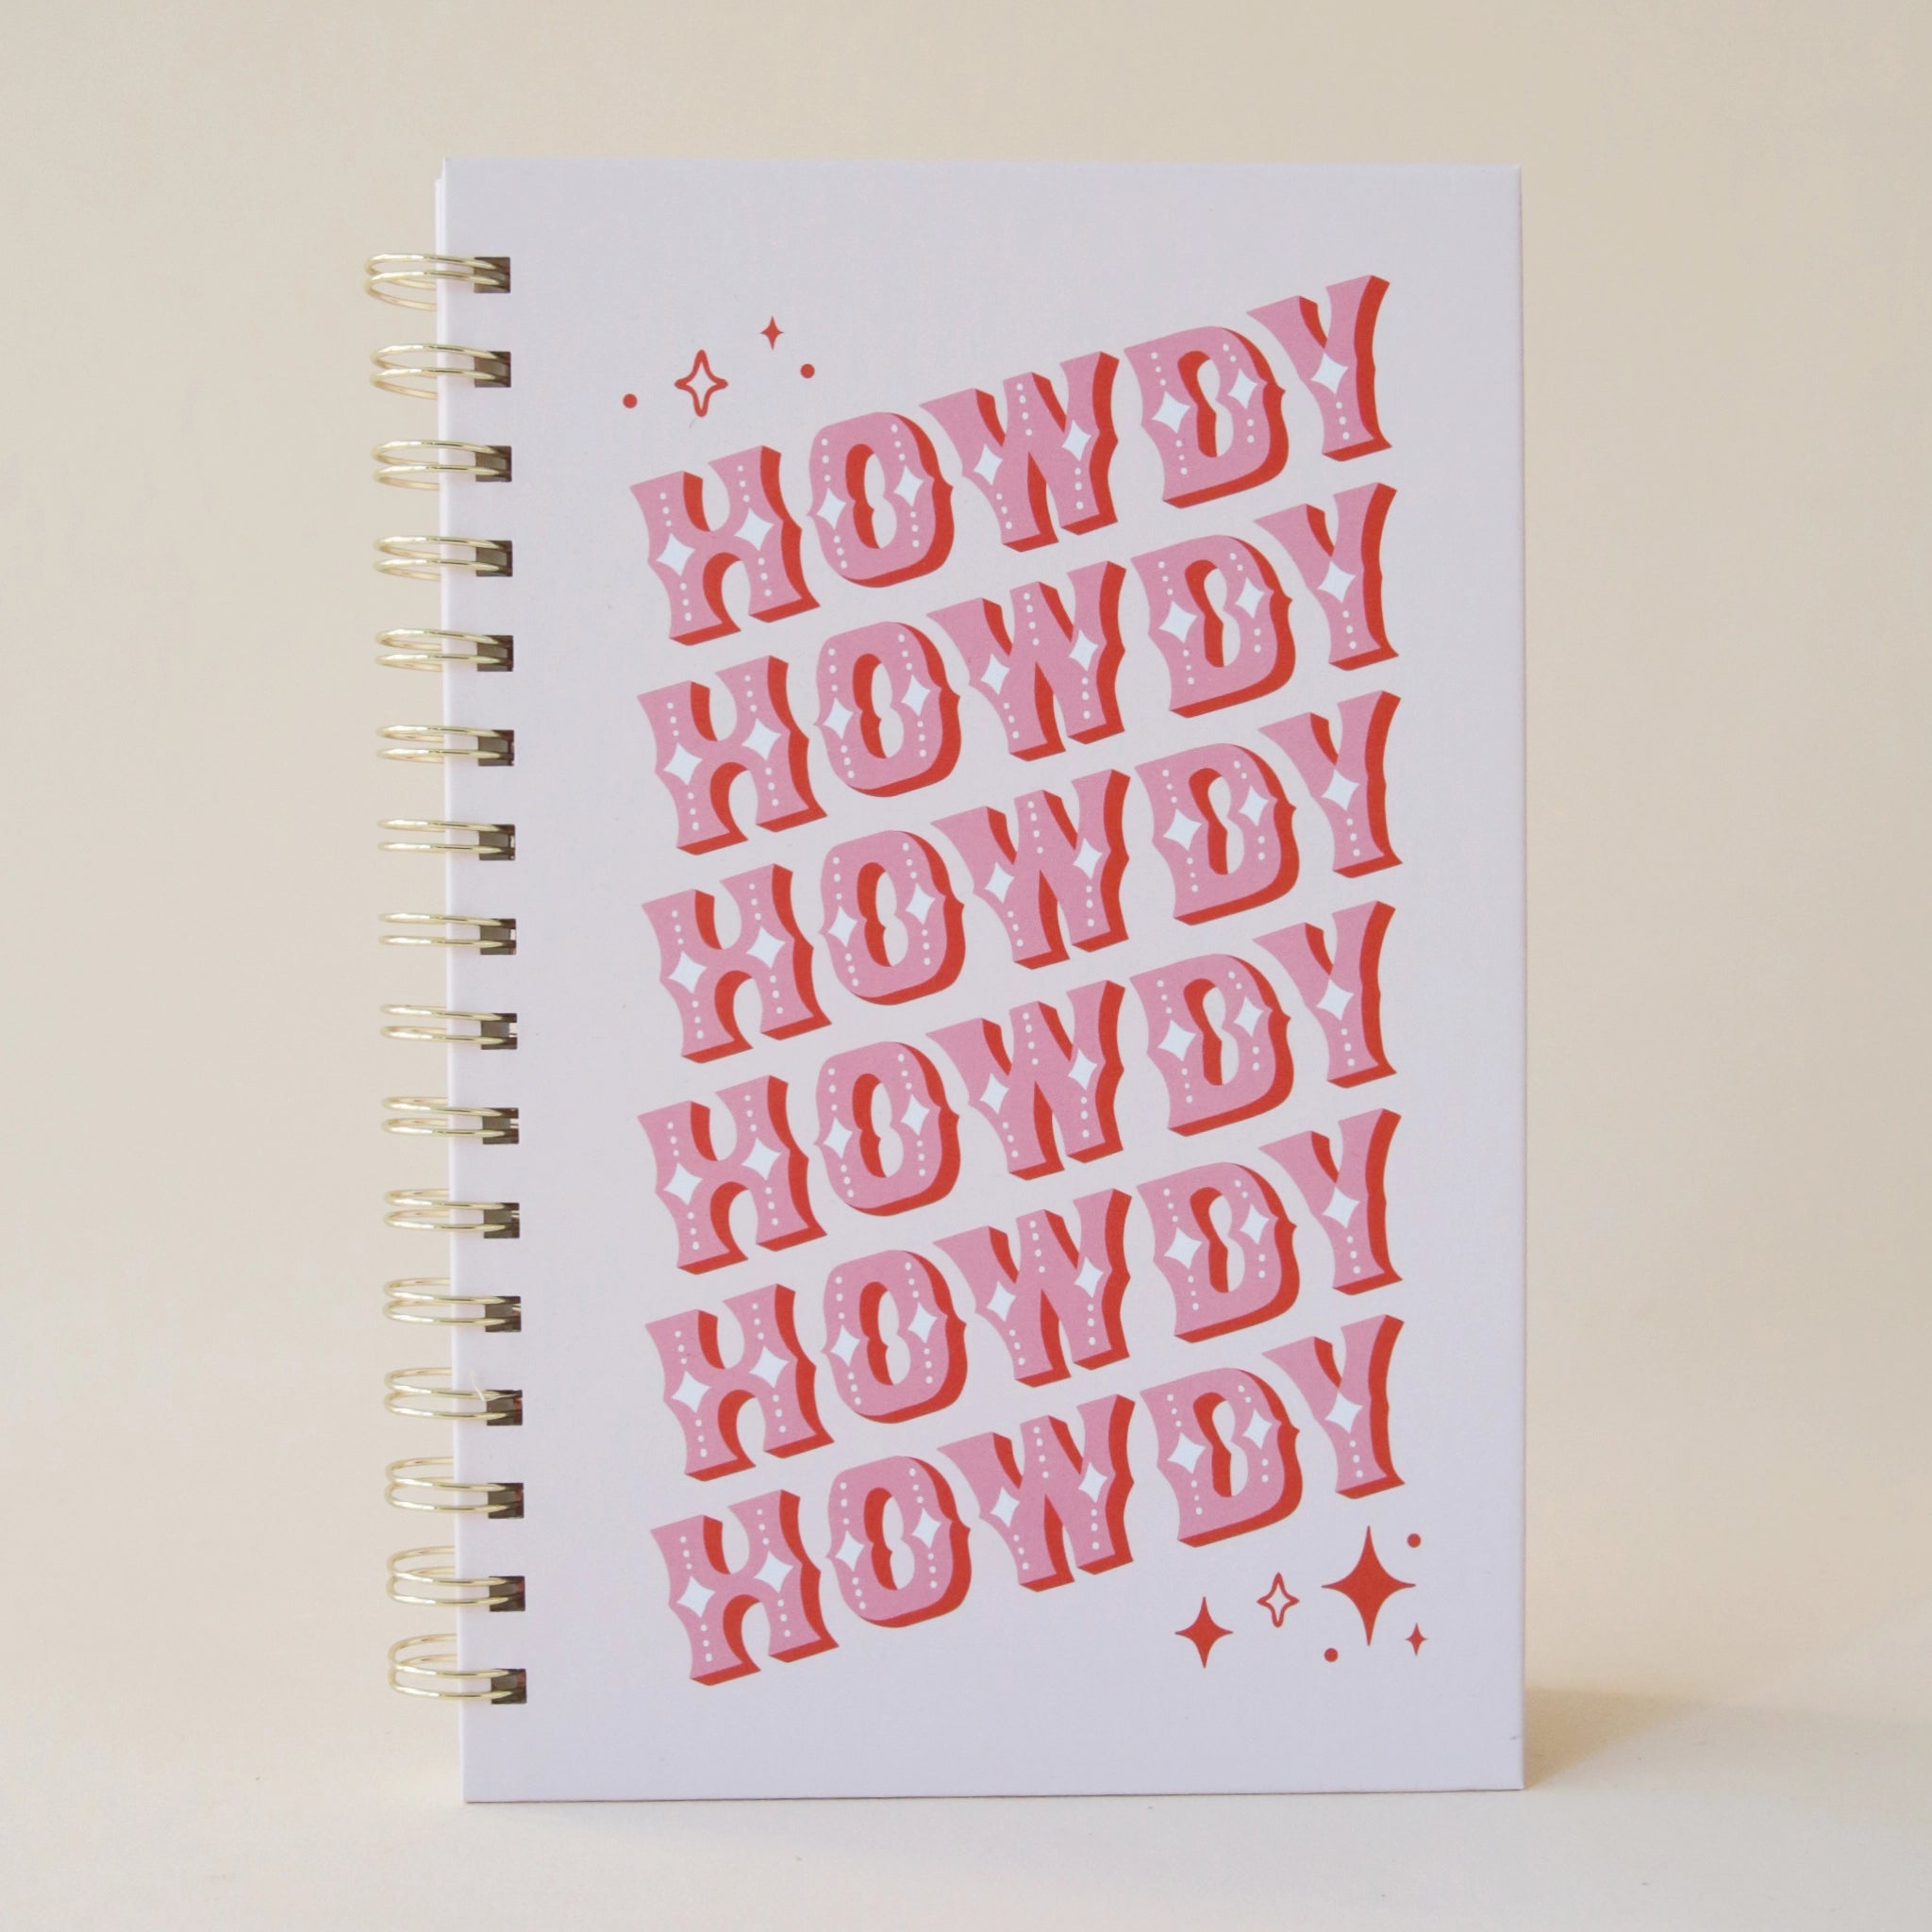 A light purple / cool toned pink notebook with the word "Howdy" slightly angled and stacked six times in pink western font and featuring a spiral bound detail.